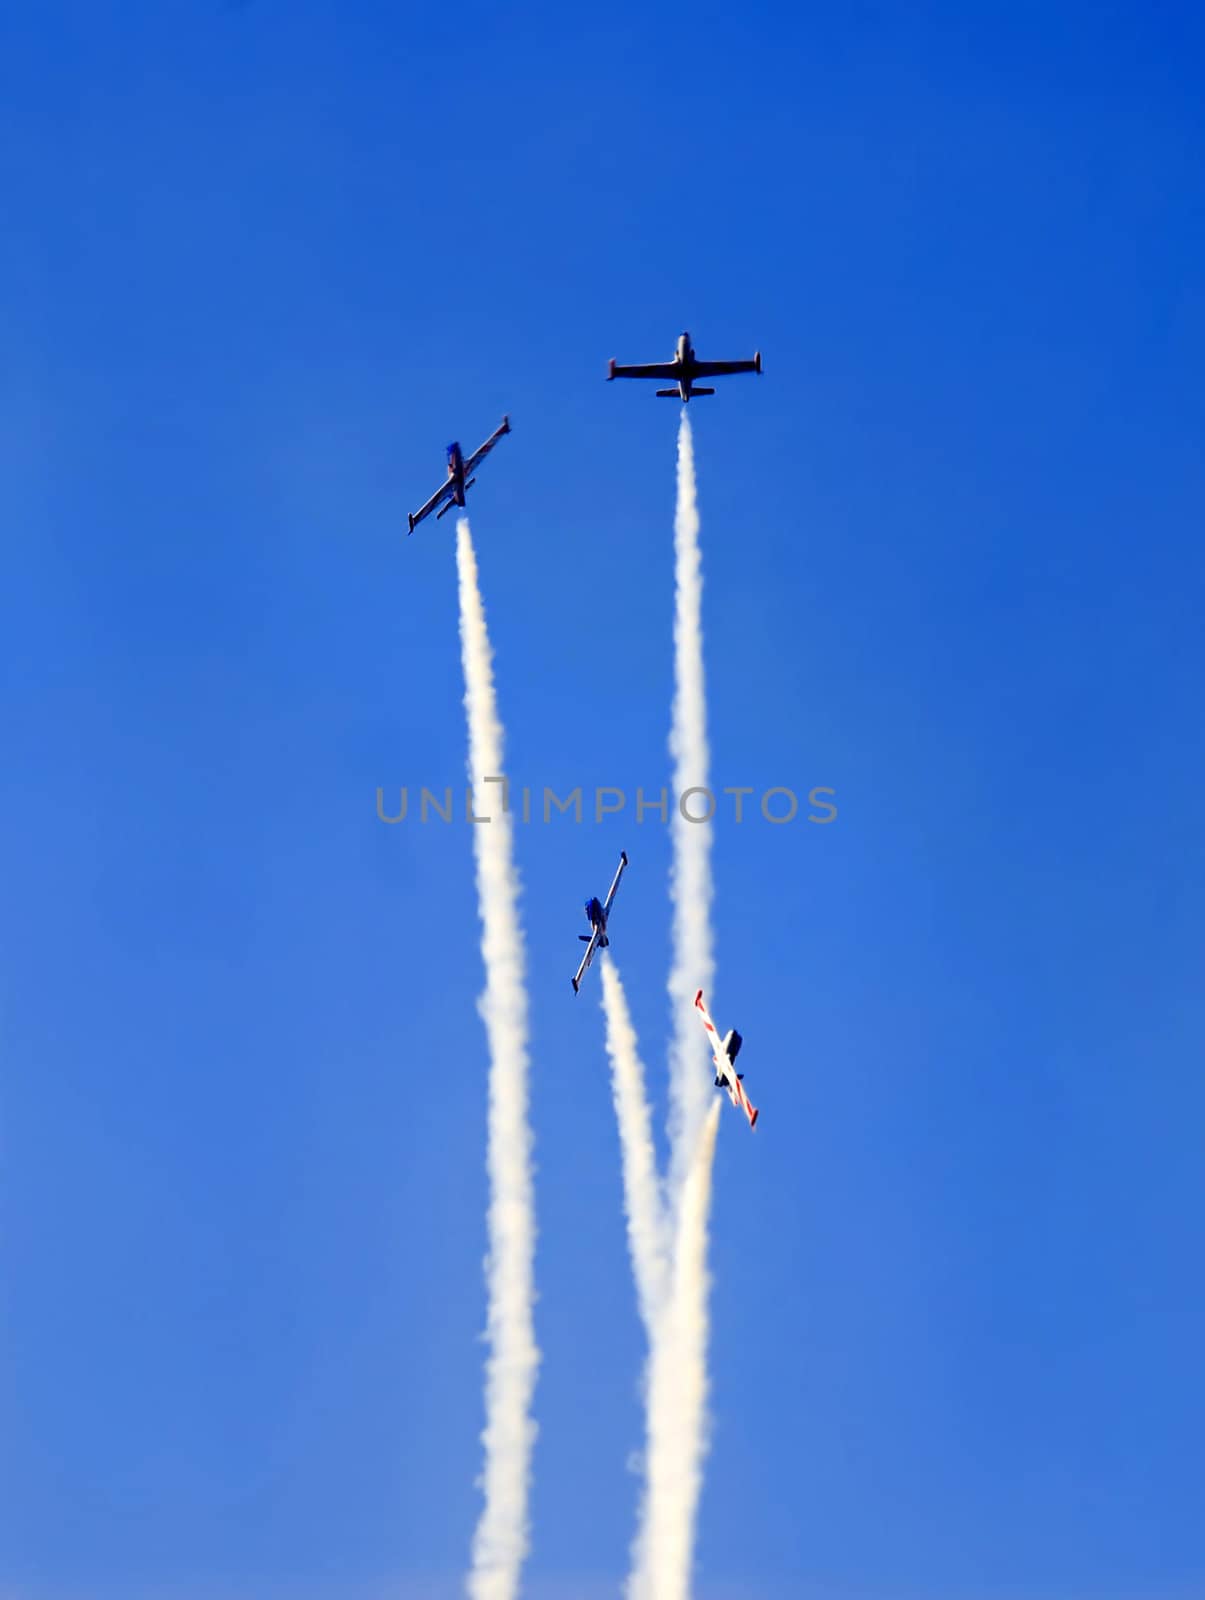 planes group in acrobatic flight with smoke trace over blue sky